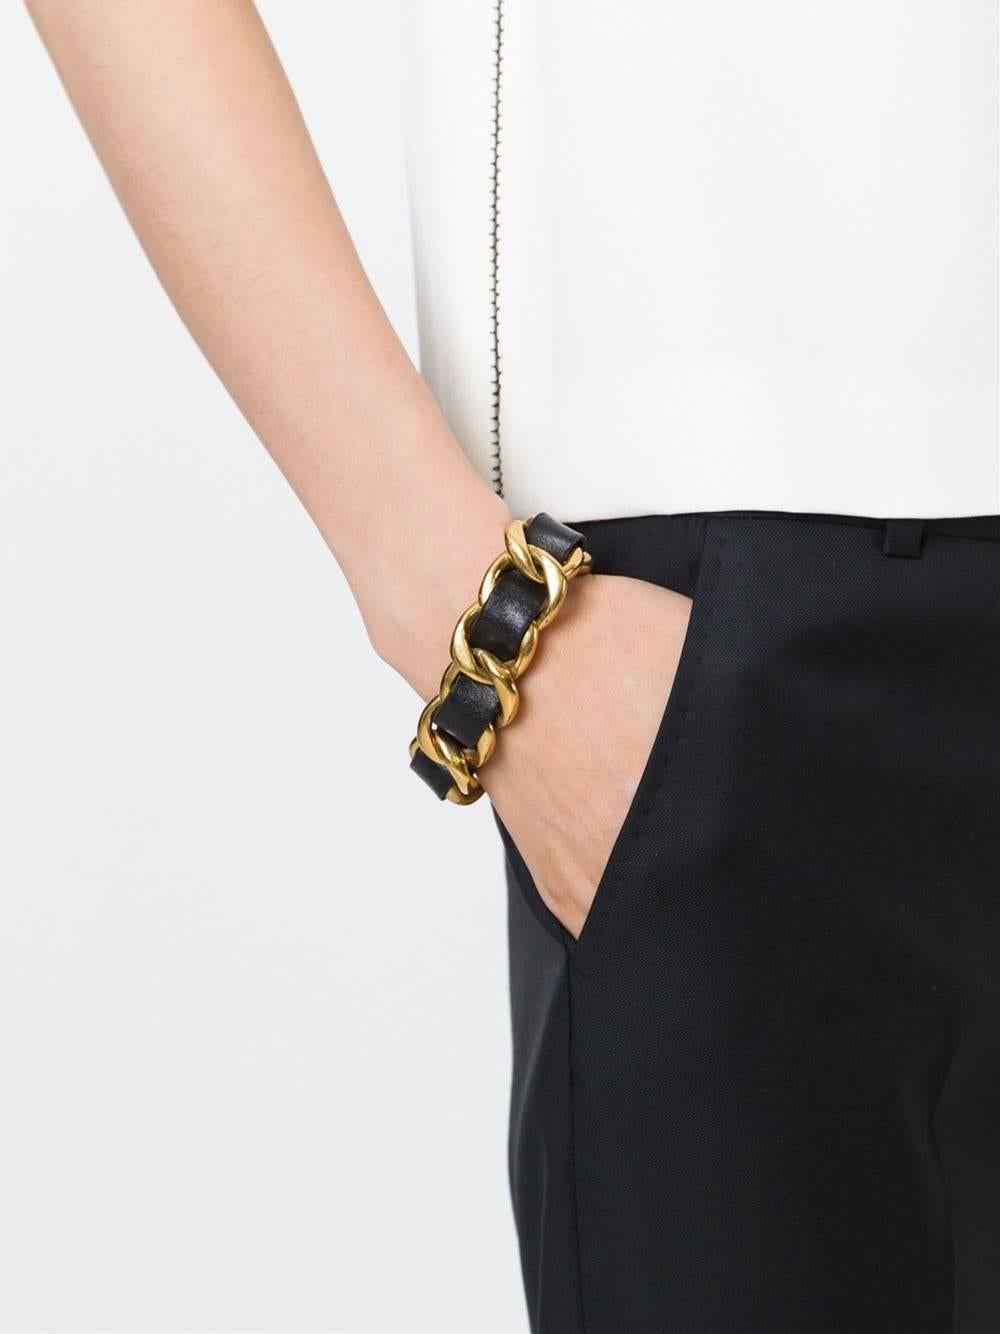 CURATOR'S NOTES

How about a little rock and roll wrapped around your pretty little wrist? Rockin' Chanel gold tone and black leather chain bracelet. 

Metal 
Gold tone
Leather
Hook and eye closure
Total length 7